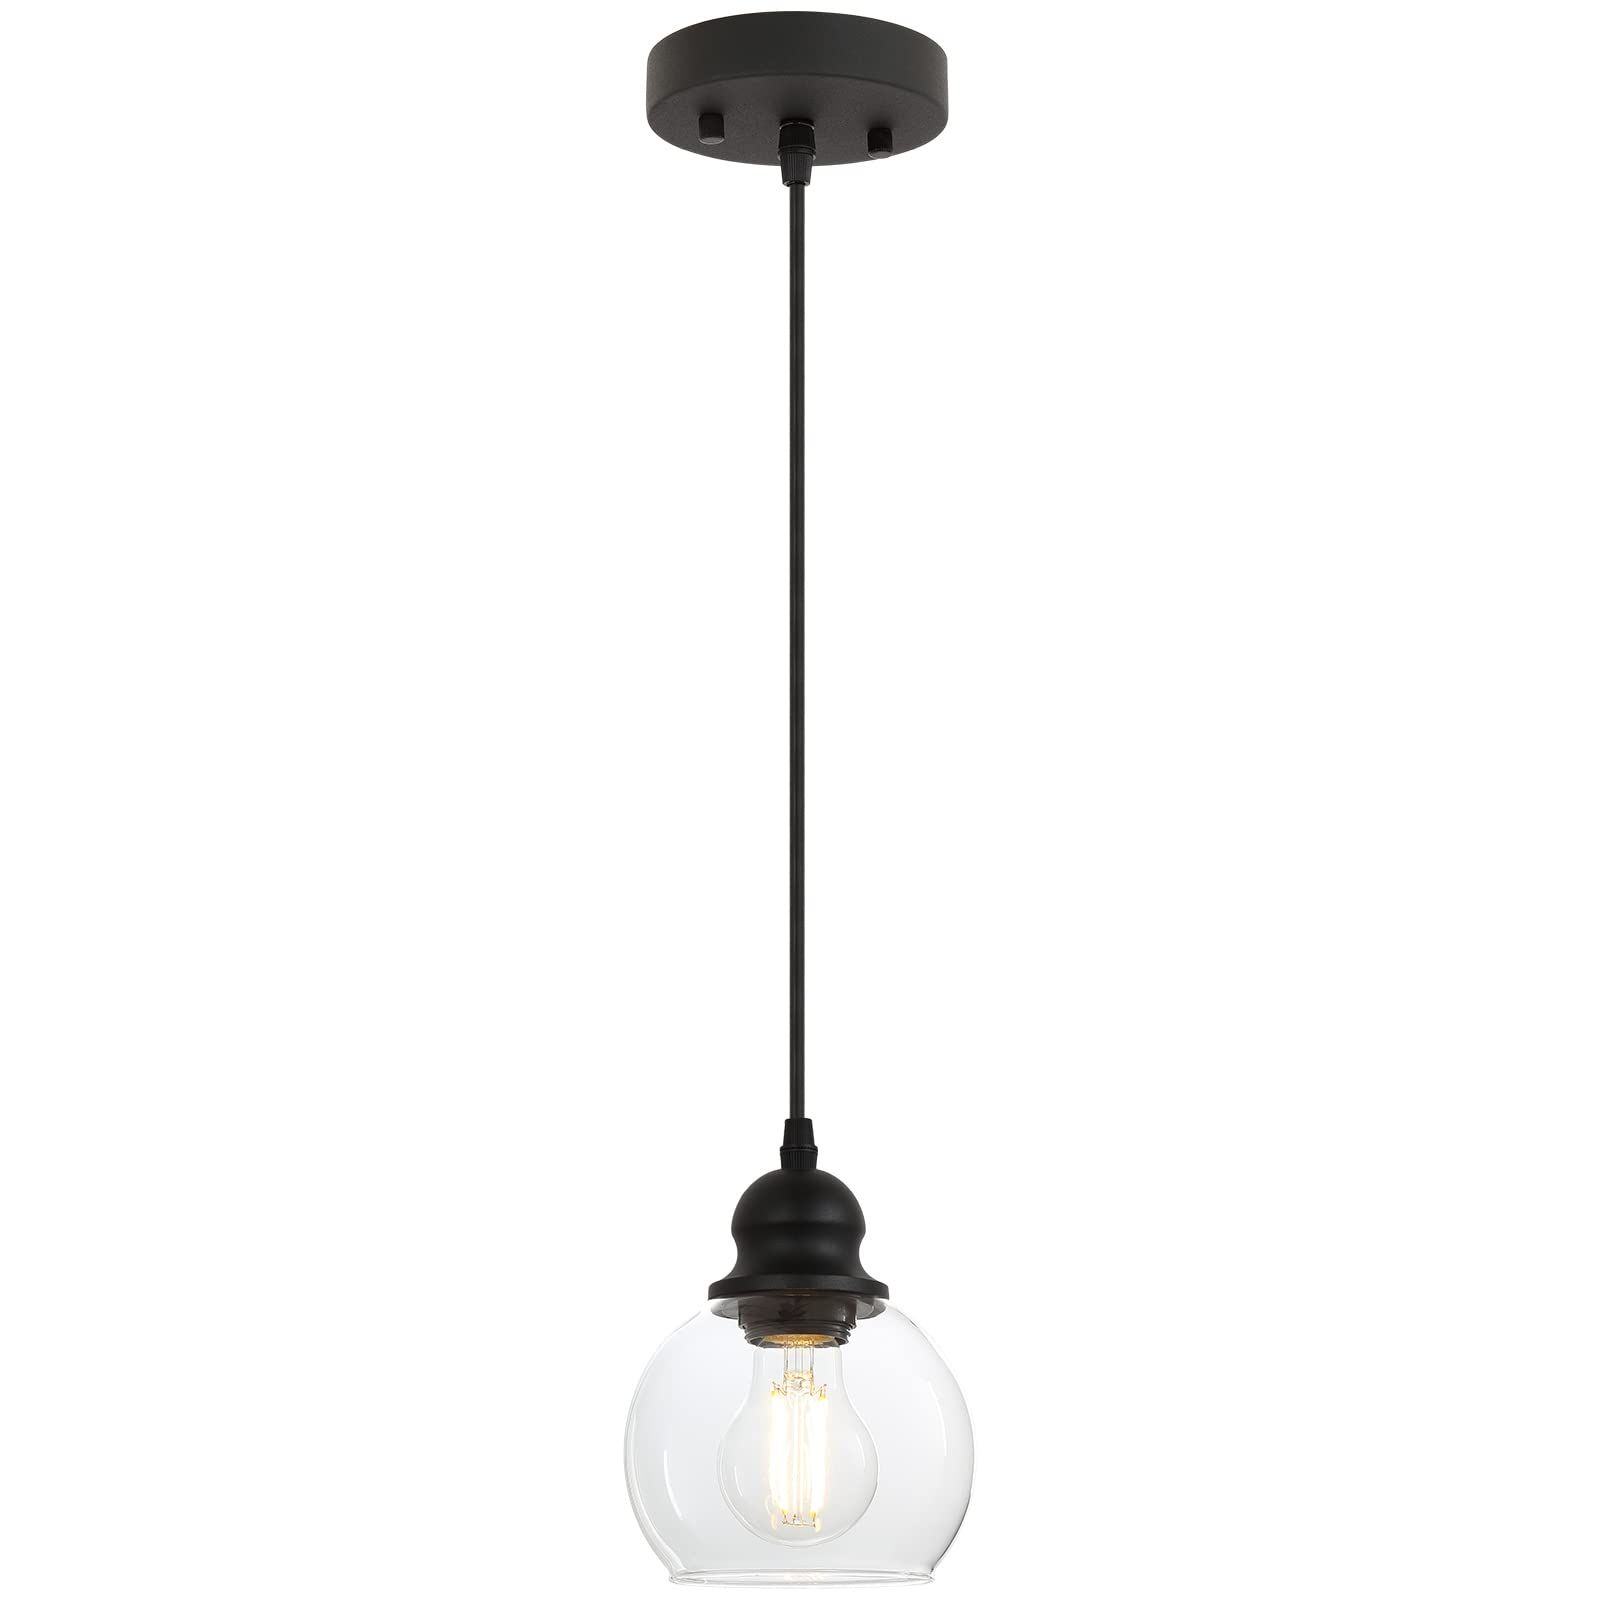 Modern Pendant Light Fixtures, Industrial Hanging Ceiling Lamp with Clear Glass Shade, Vintage Black | Amazon (US)